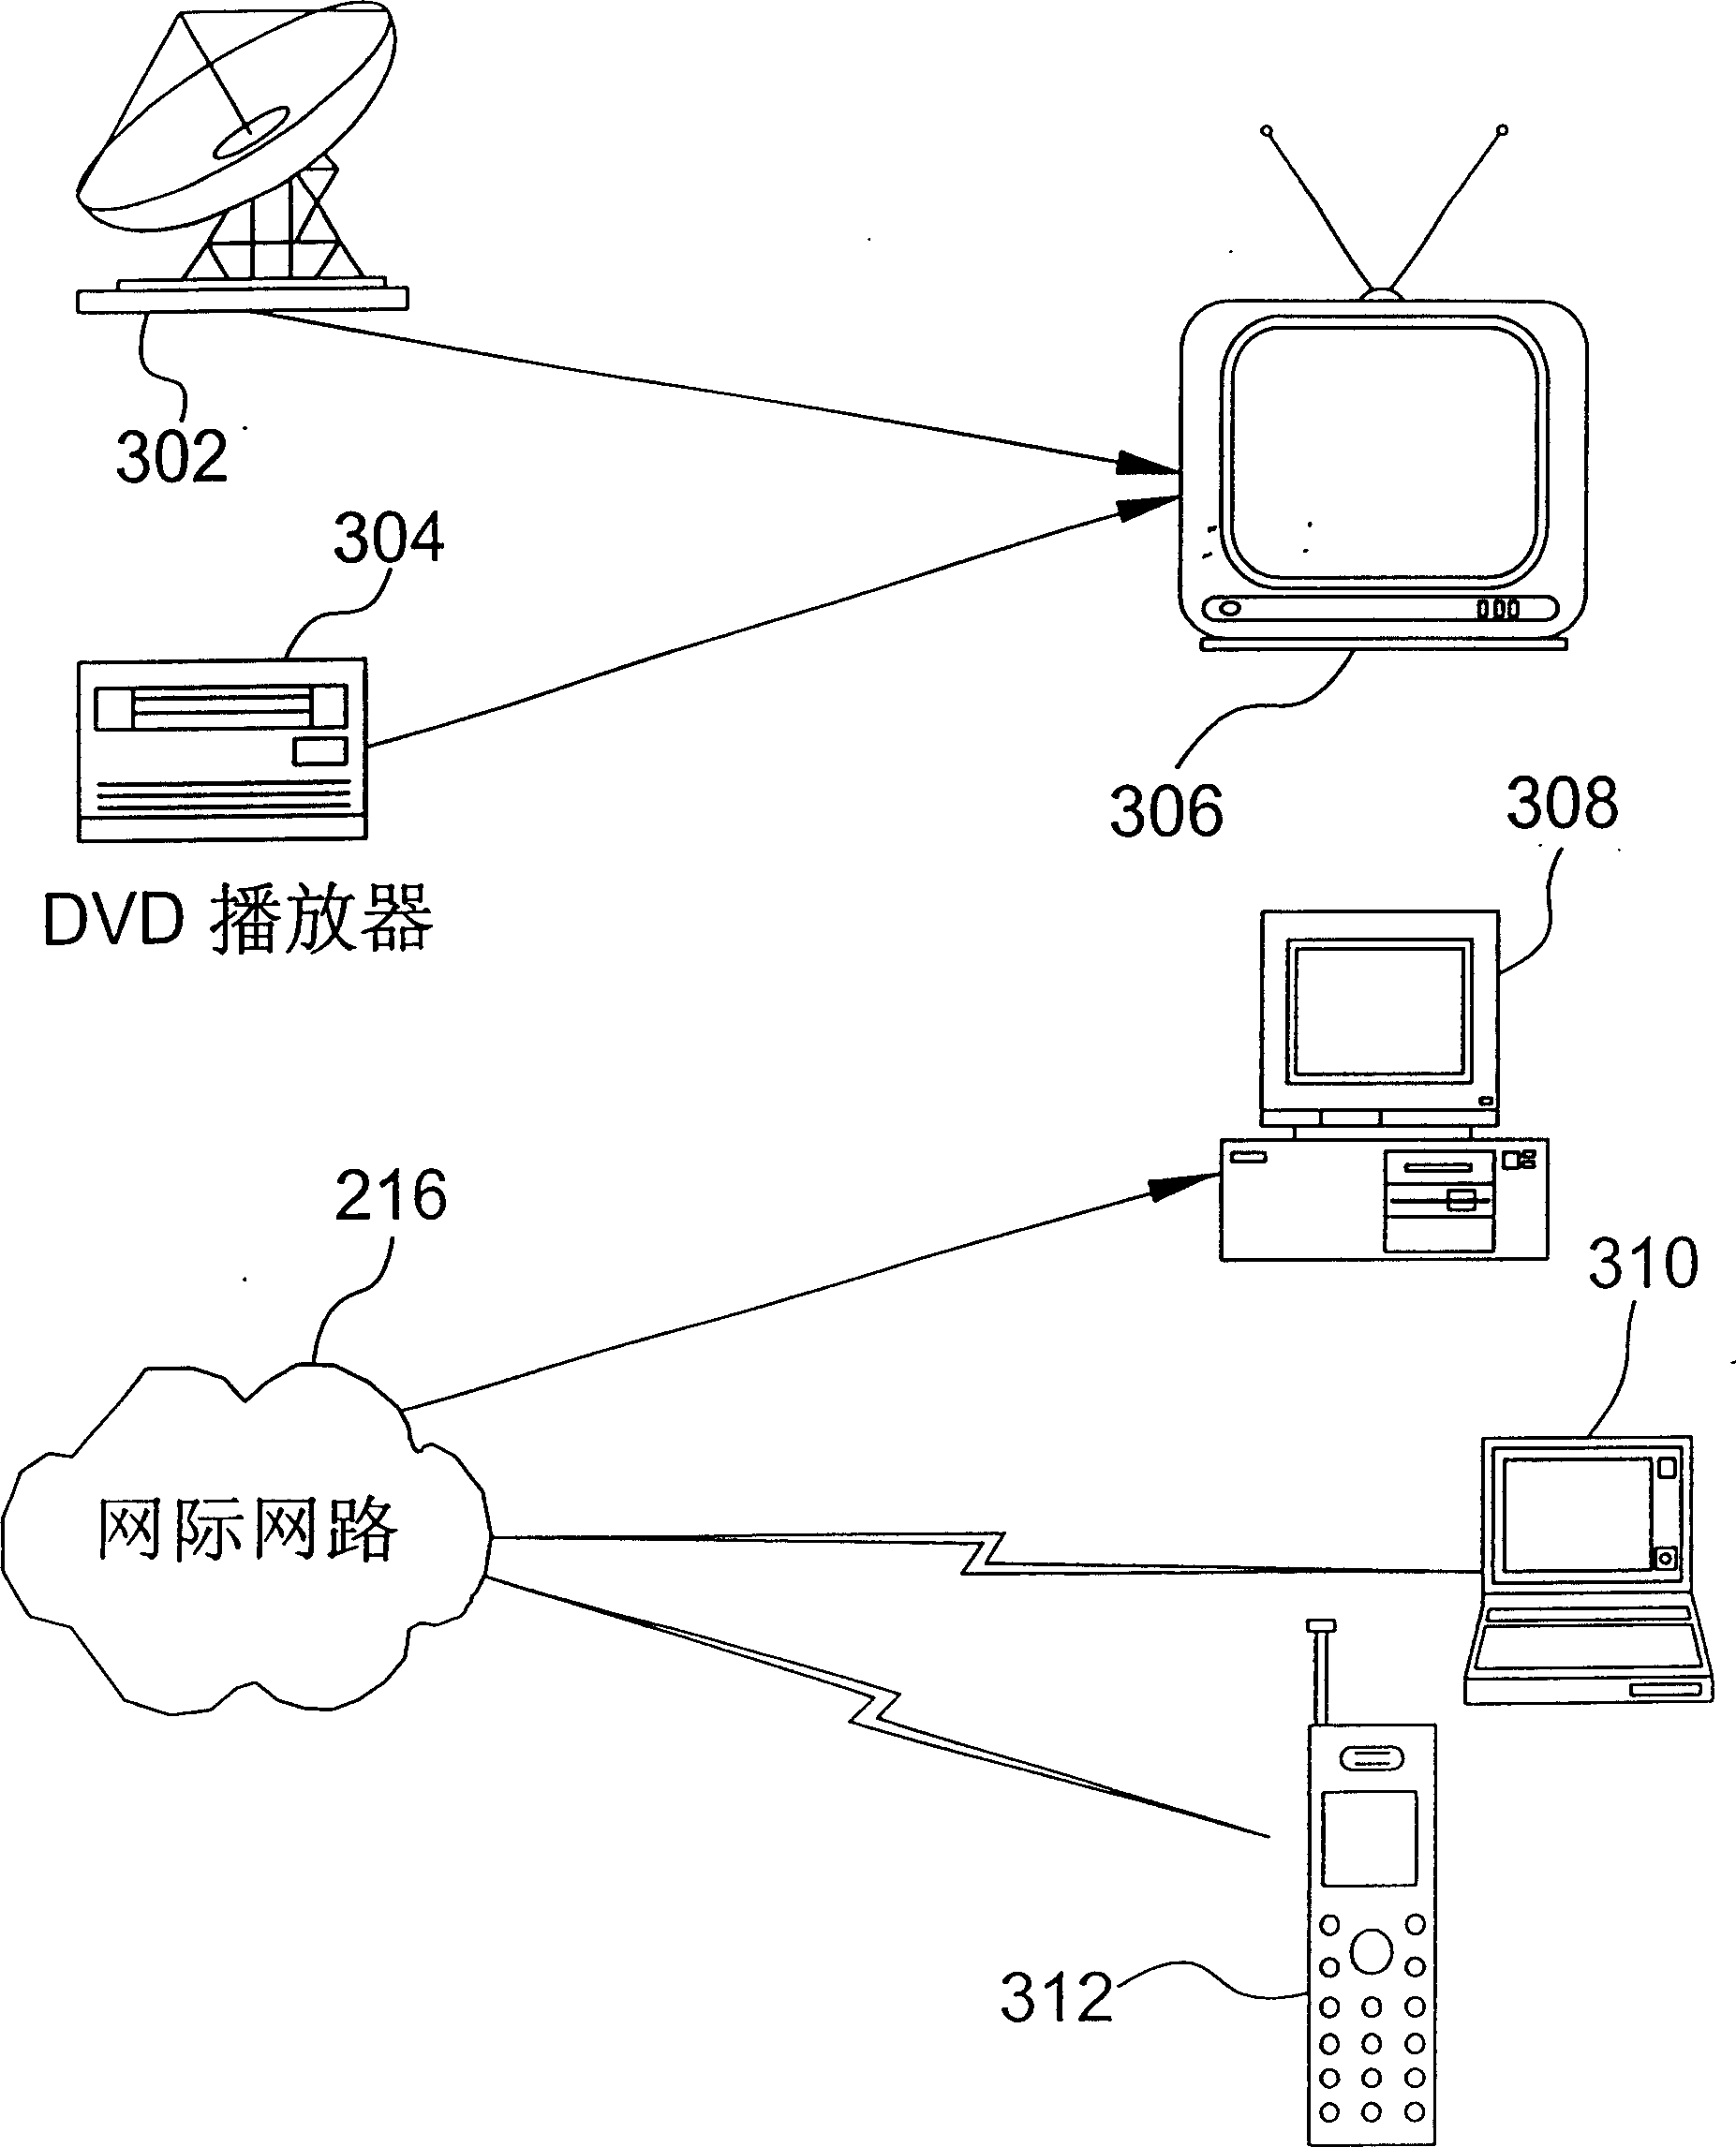 Systems and methods for adaptively filtering DCT coefficients in a video encoder